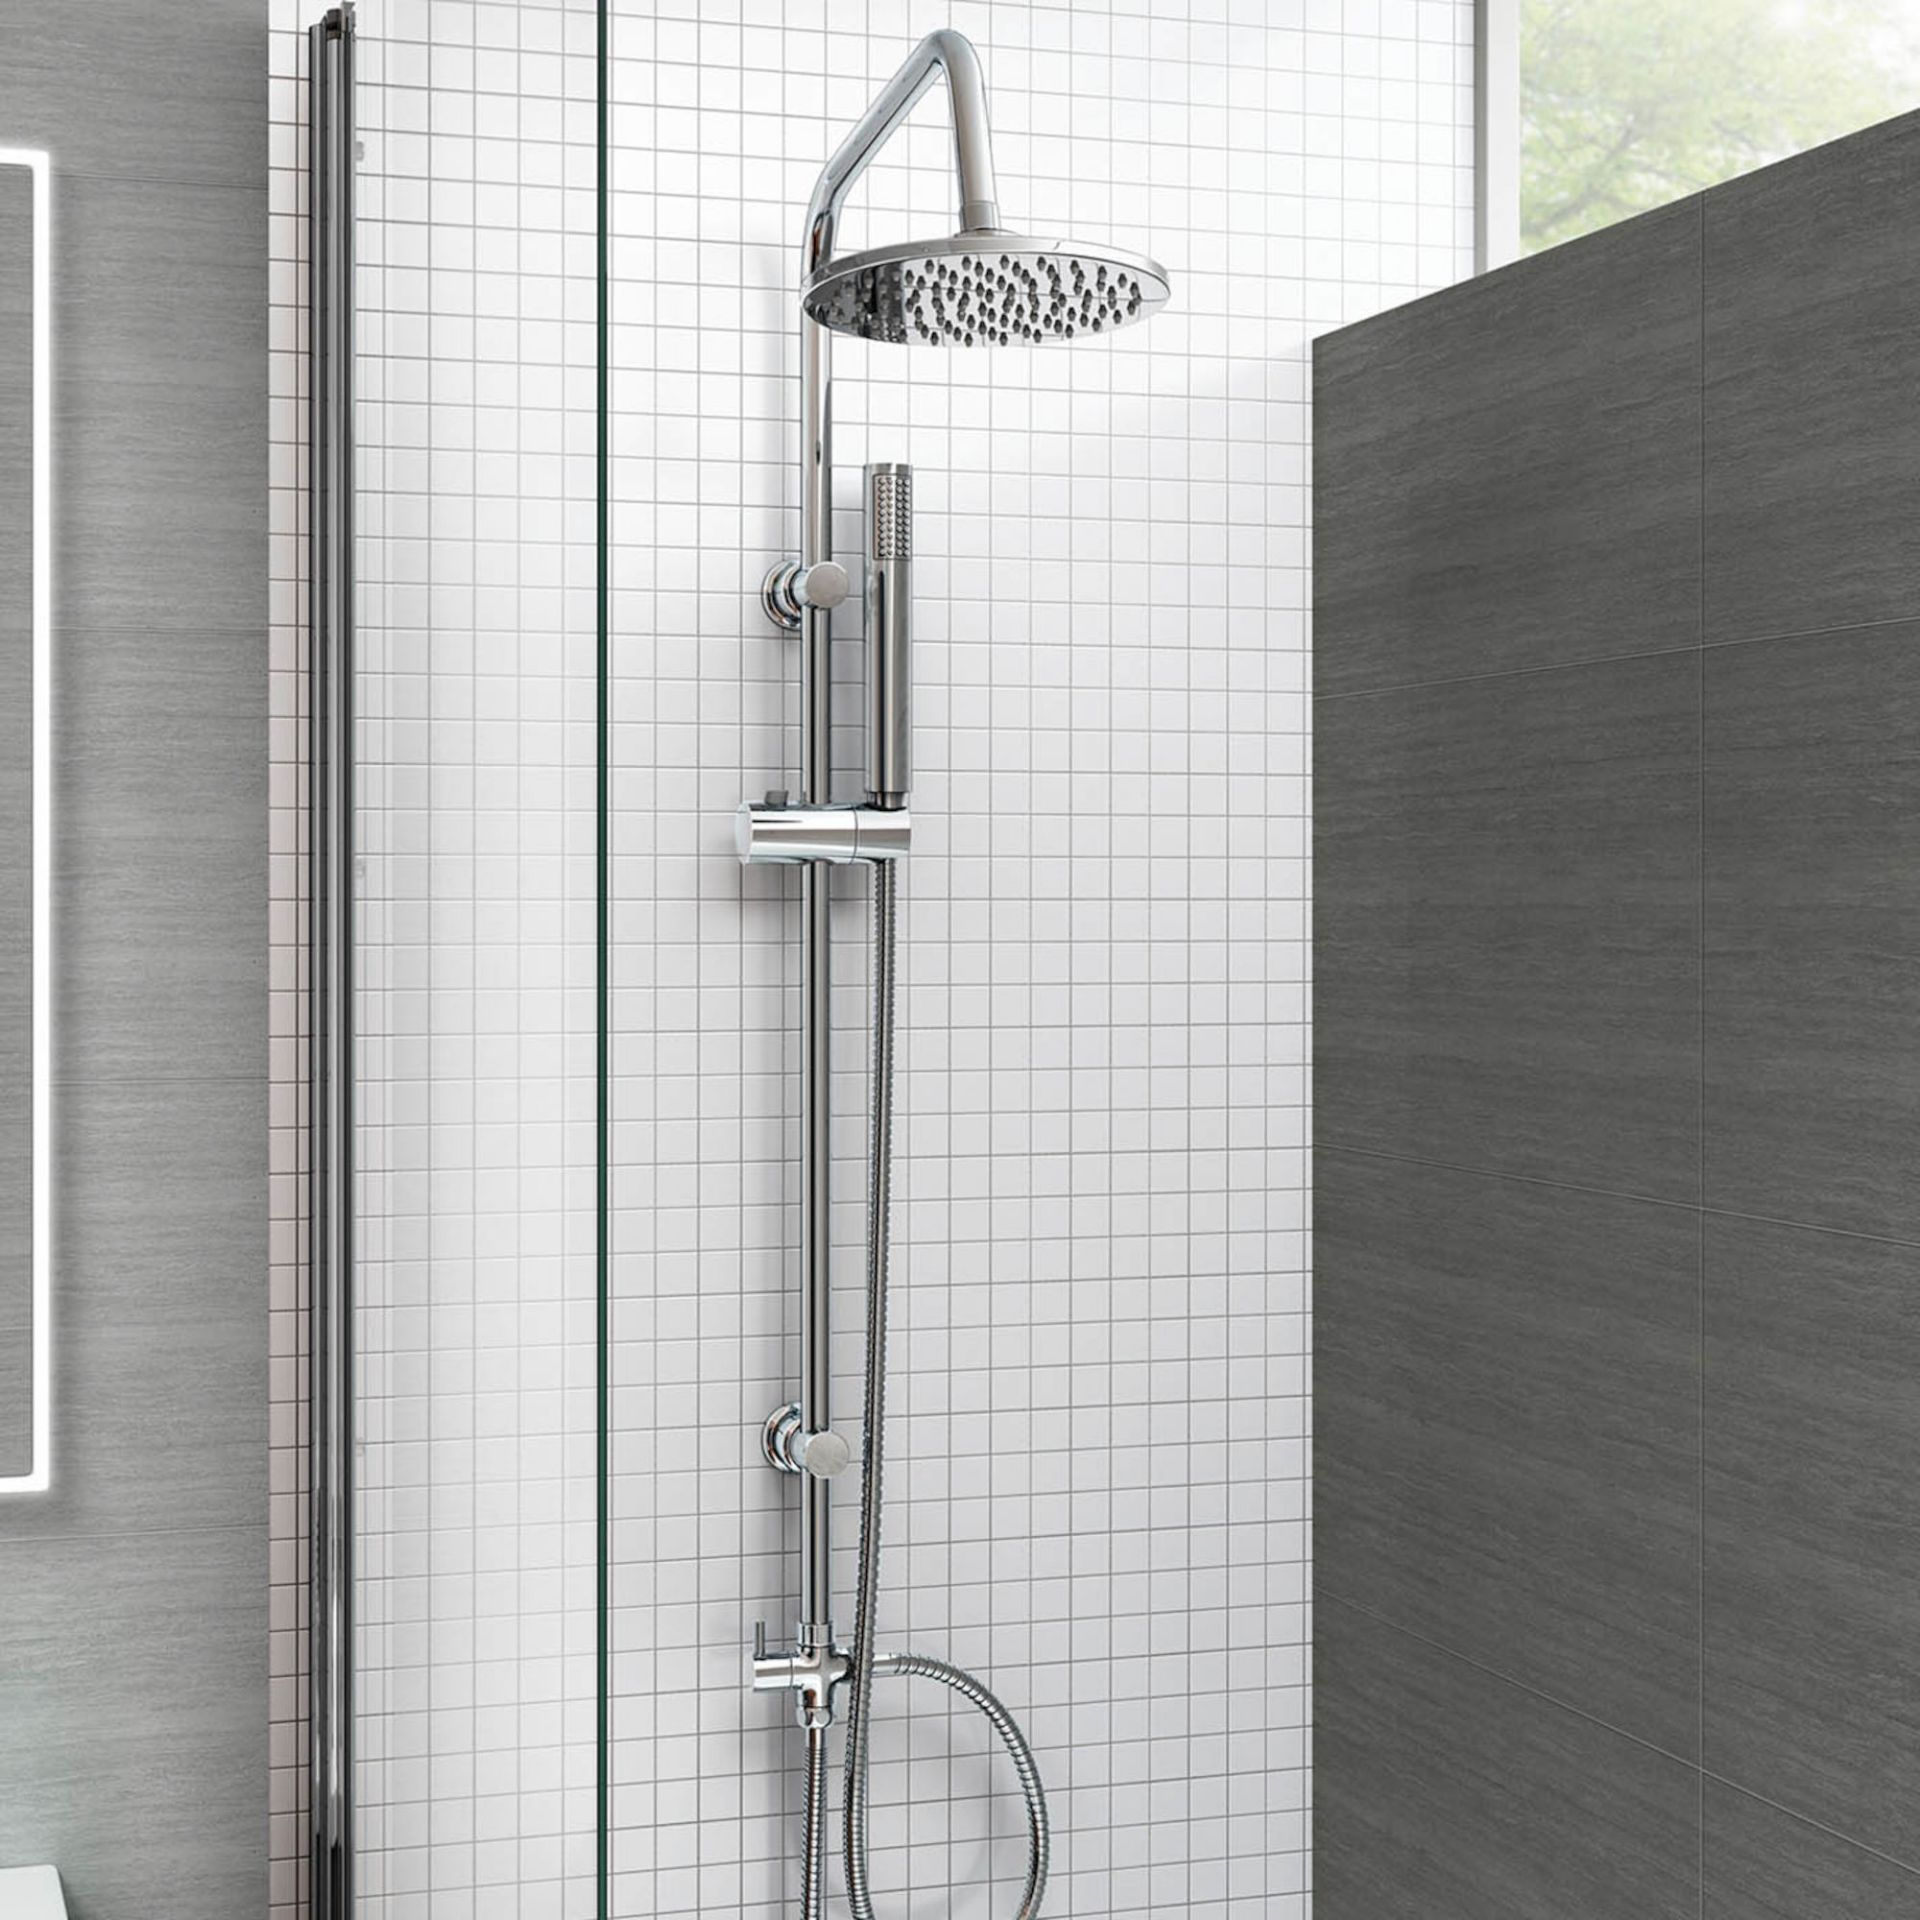 (LU104) 200mm Round Head Riser Rail & Handheld Kit. Quality stainless steel shower head with Easy